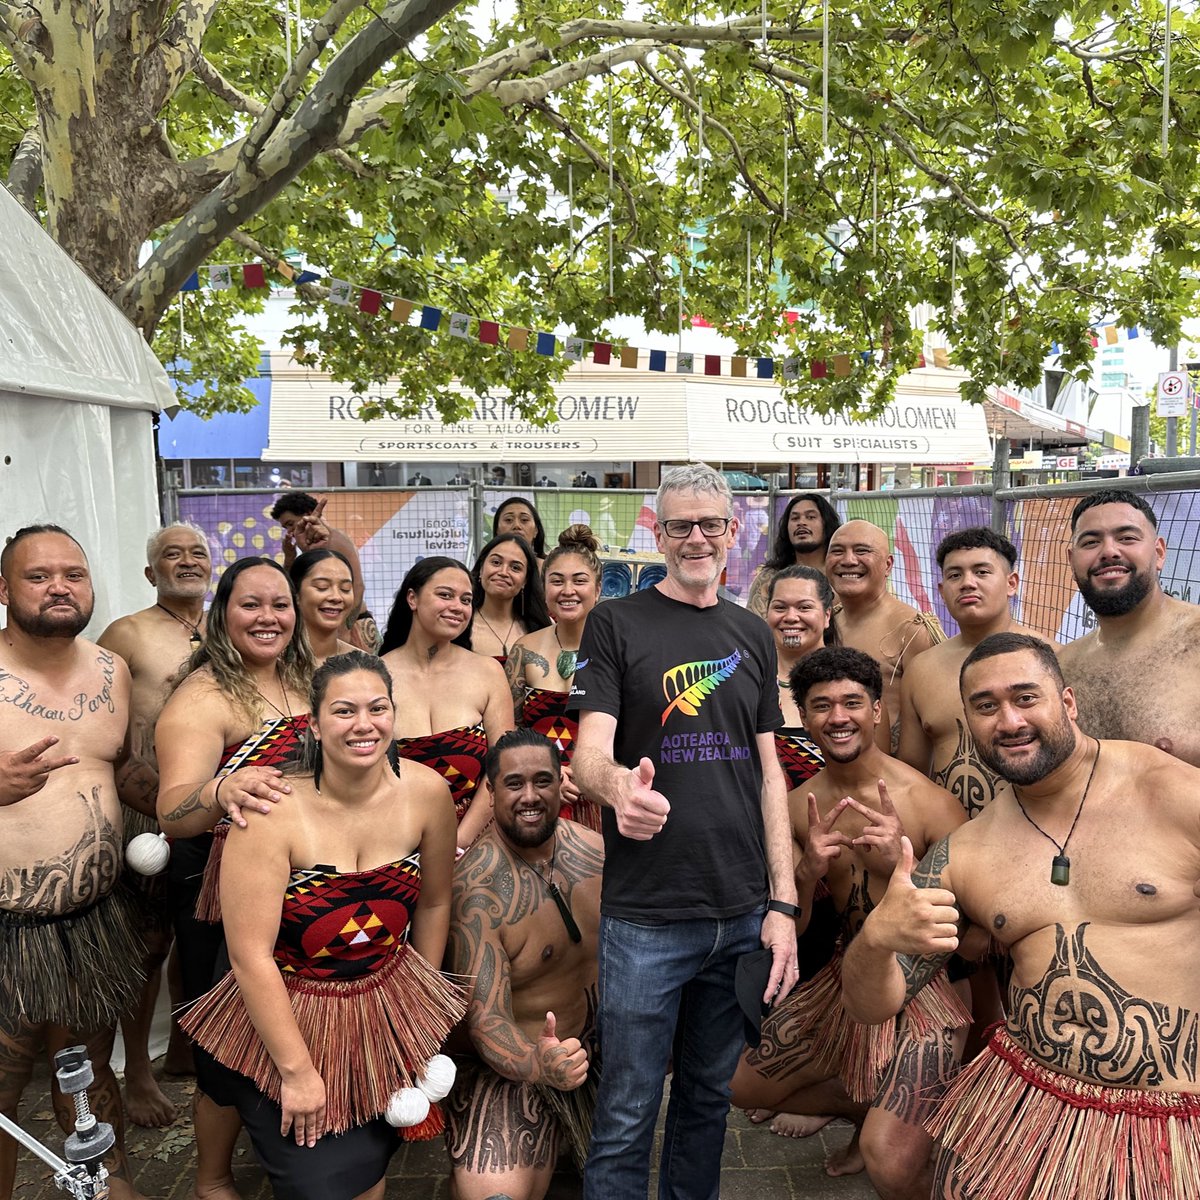 Acting High Commissioner Eamonn O’Shaughnessy backstage with Te Aranganui culture club at yesterday’s @NatMultiFest a great event celebrating culture!